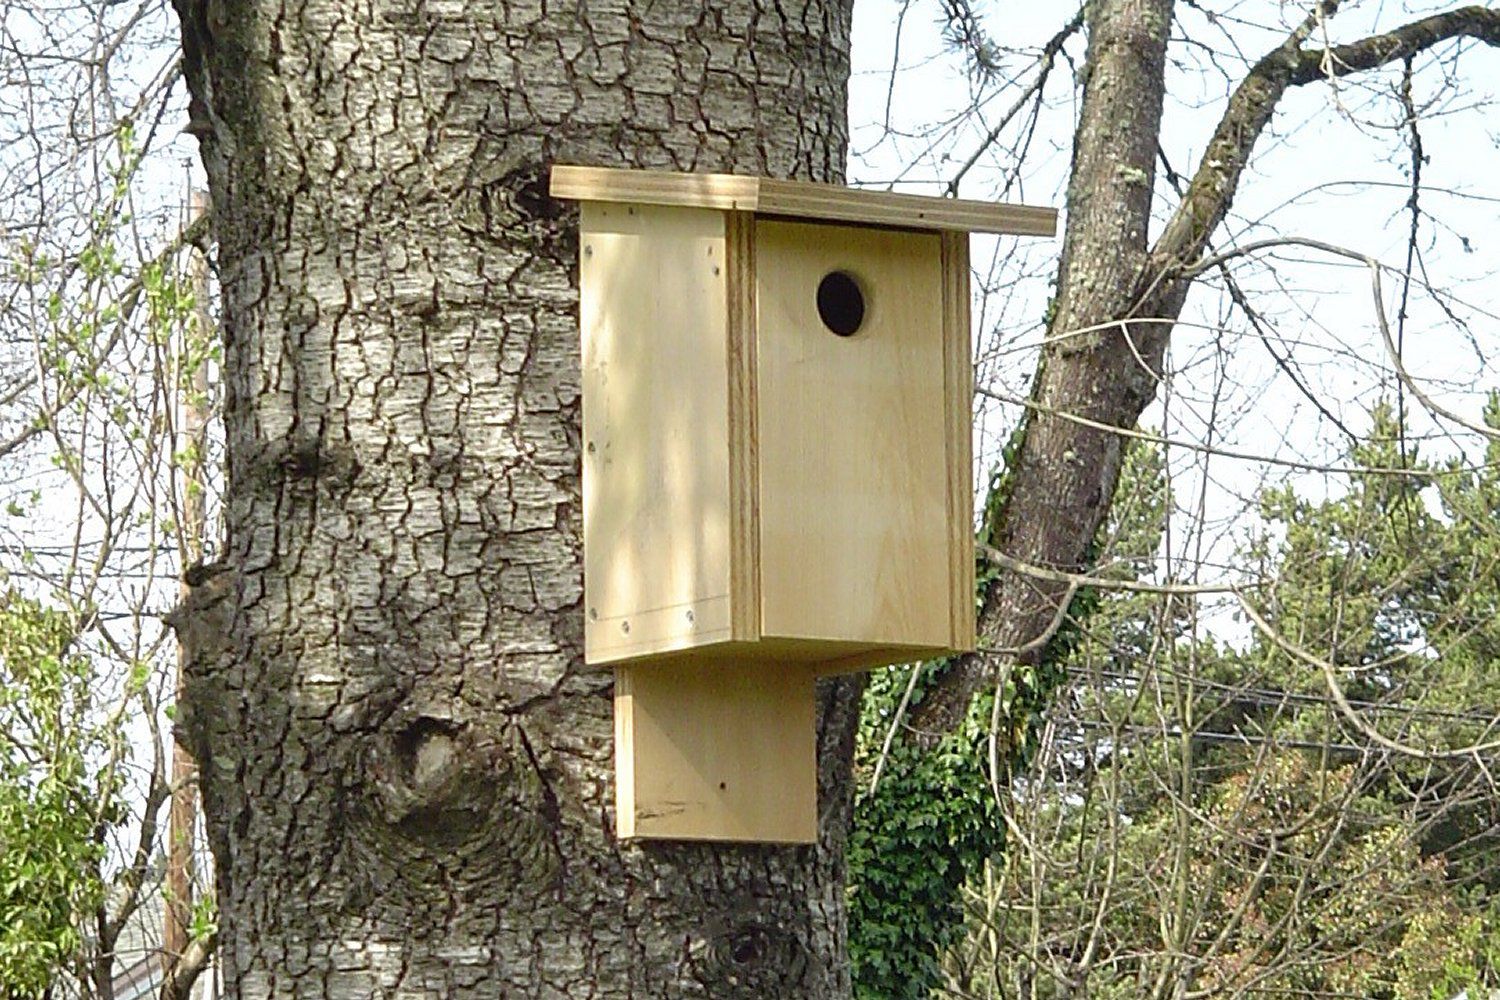 Build Your Own Bird House With a Kit